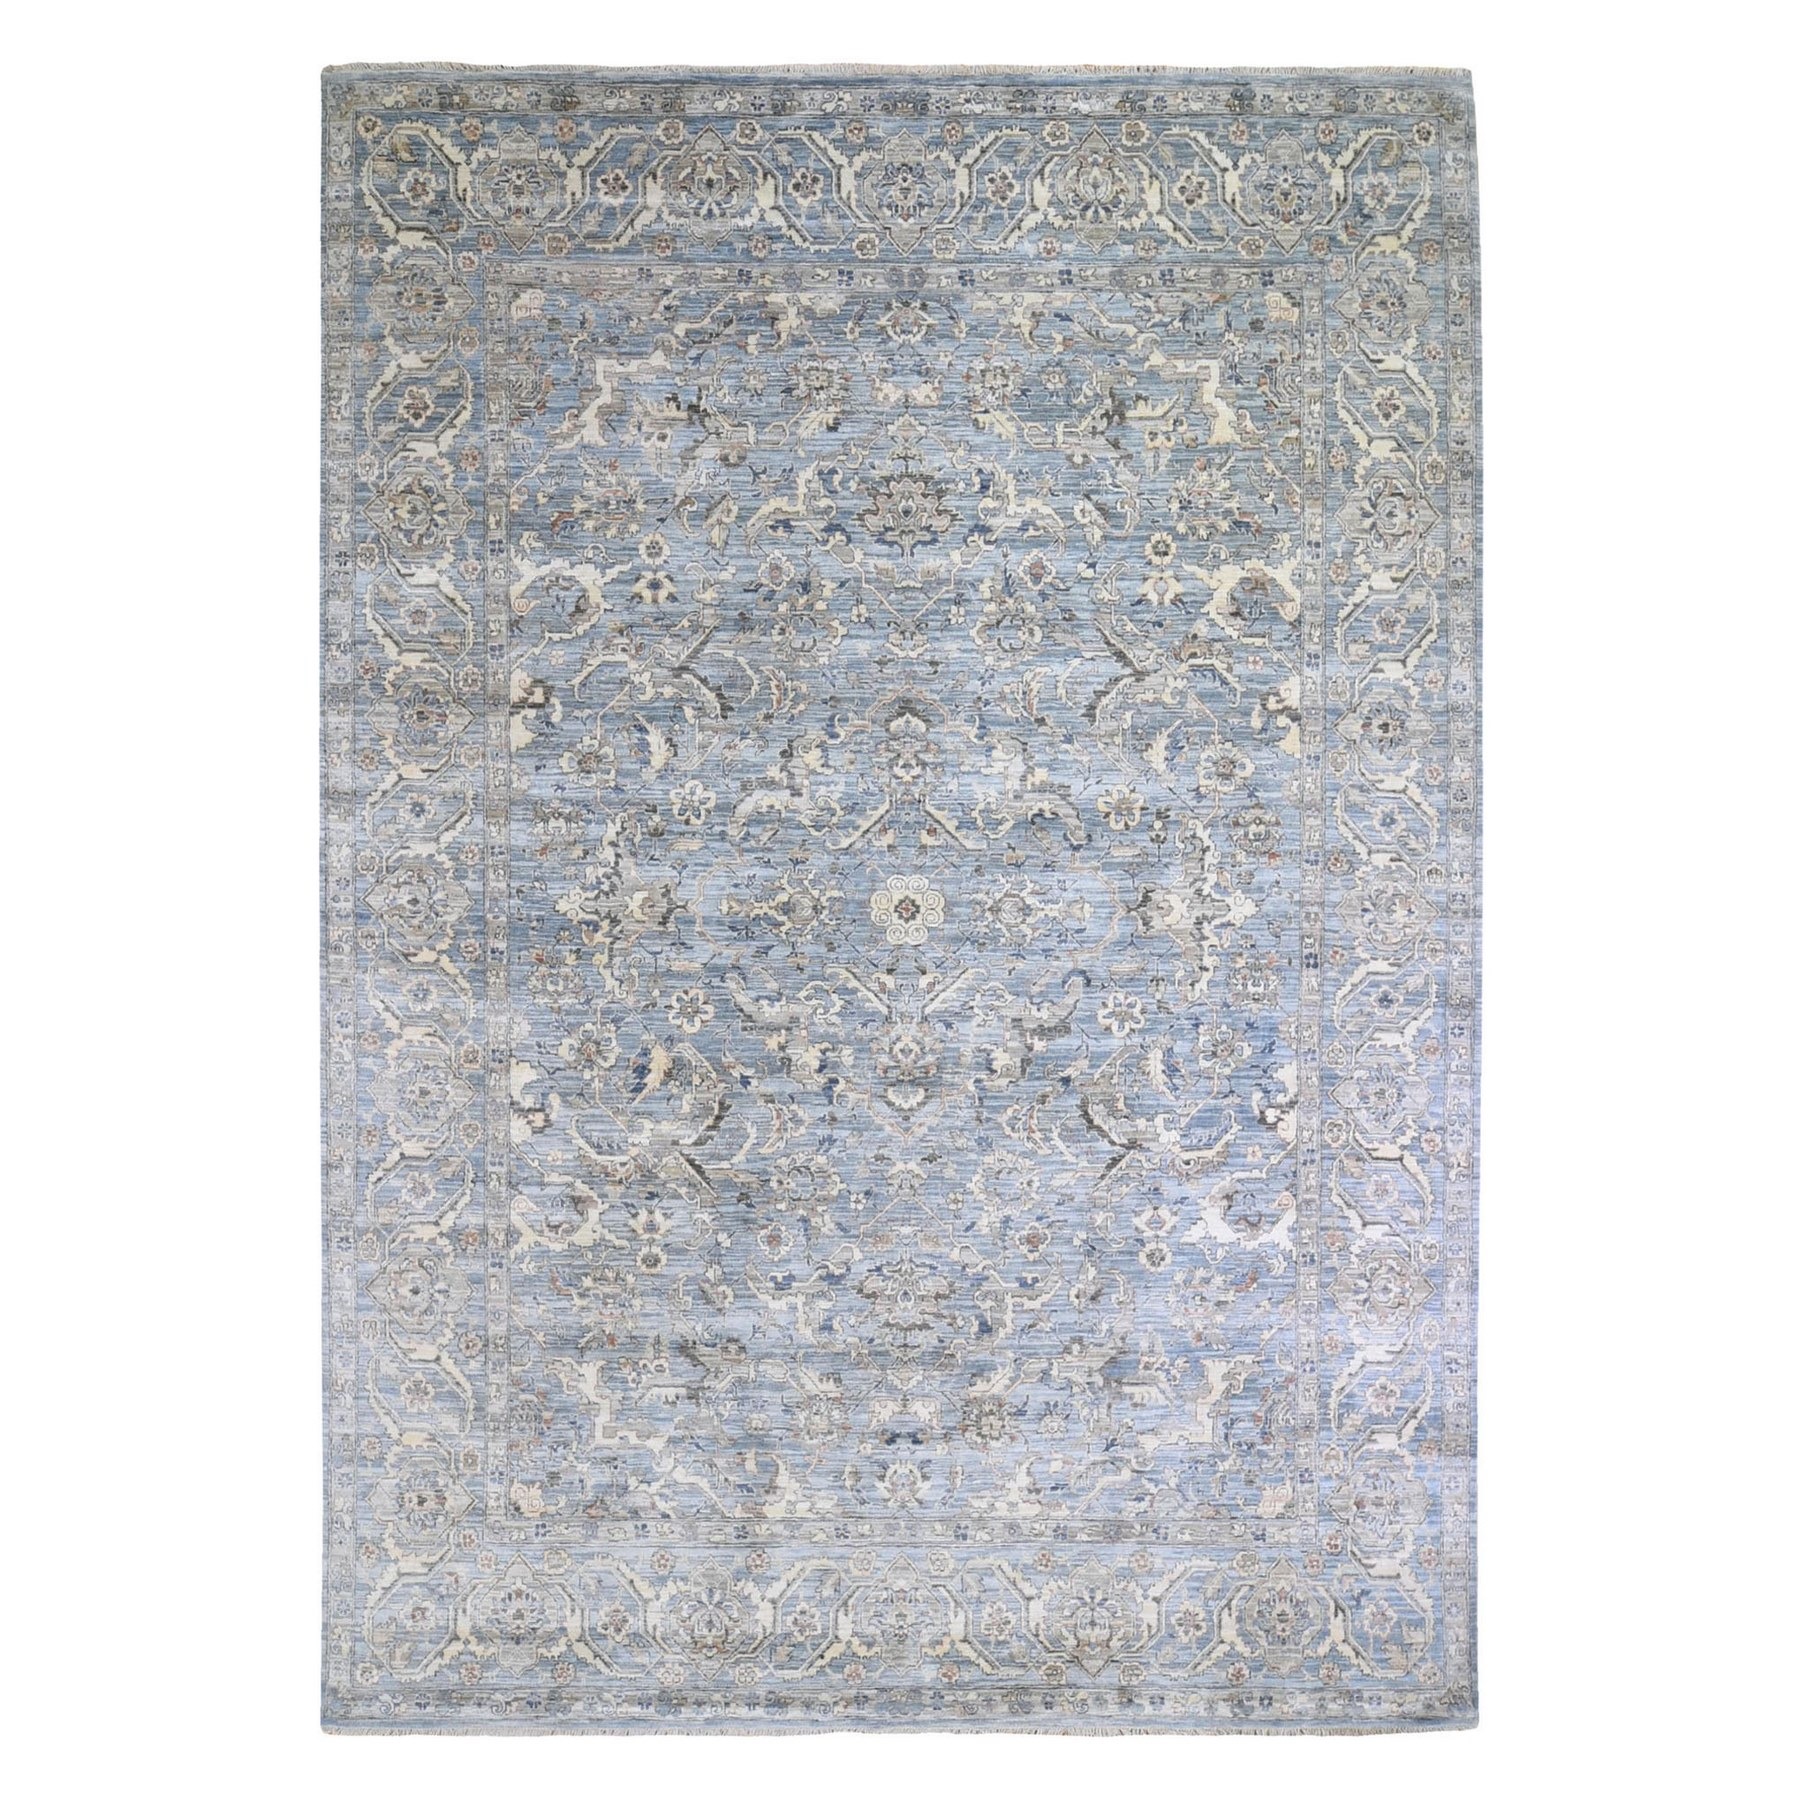 Agra And Turkish Collection Hand Knotted Blue Rug No: 1132716